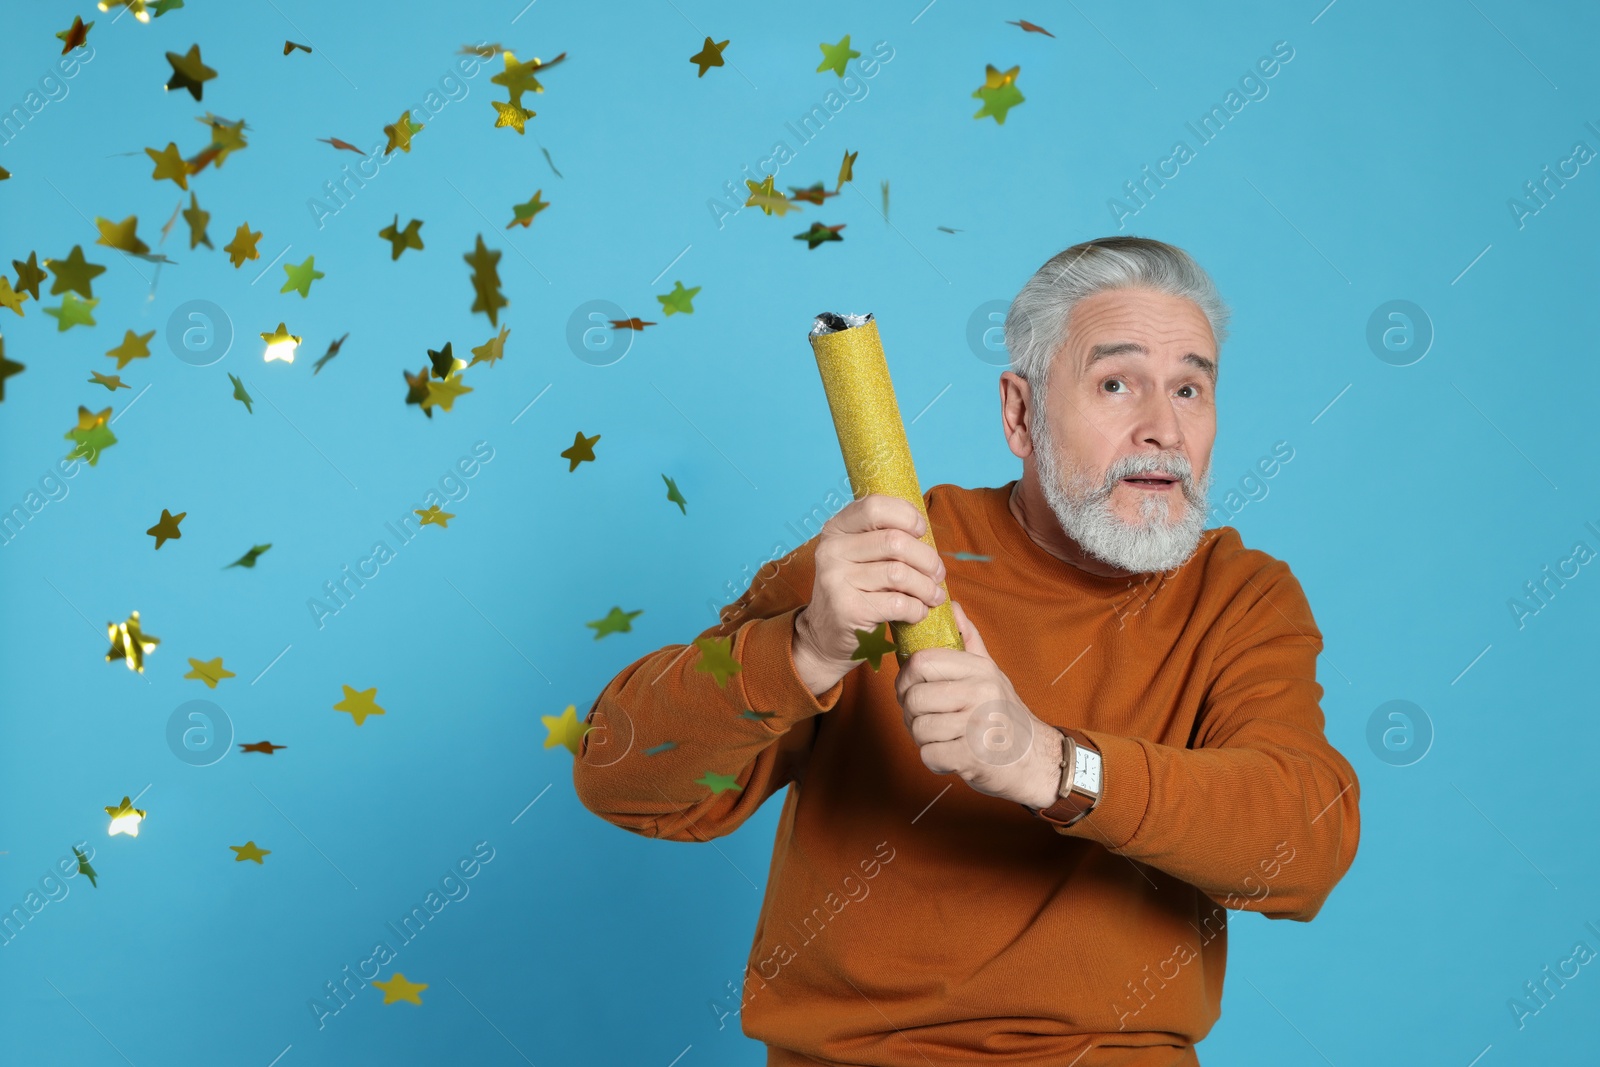 Photo of Emotional man blowing up party popper on light blue background